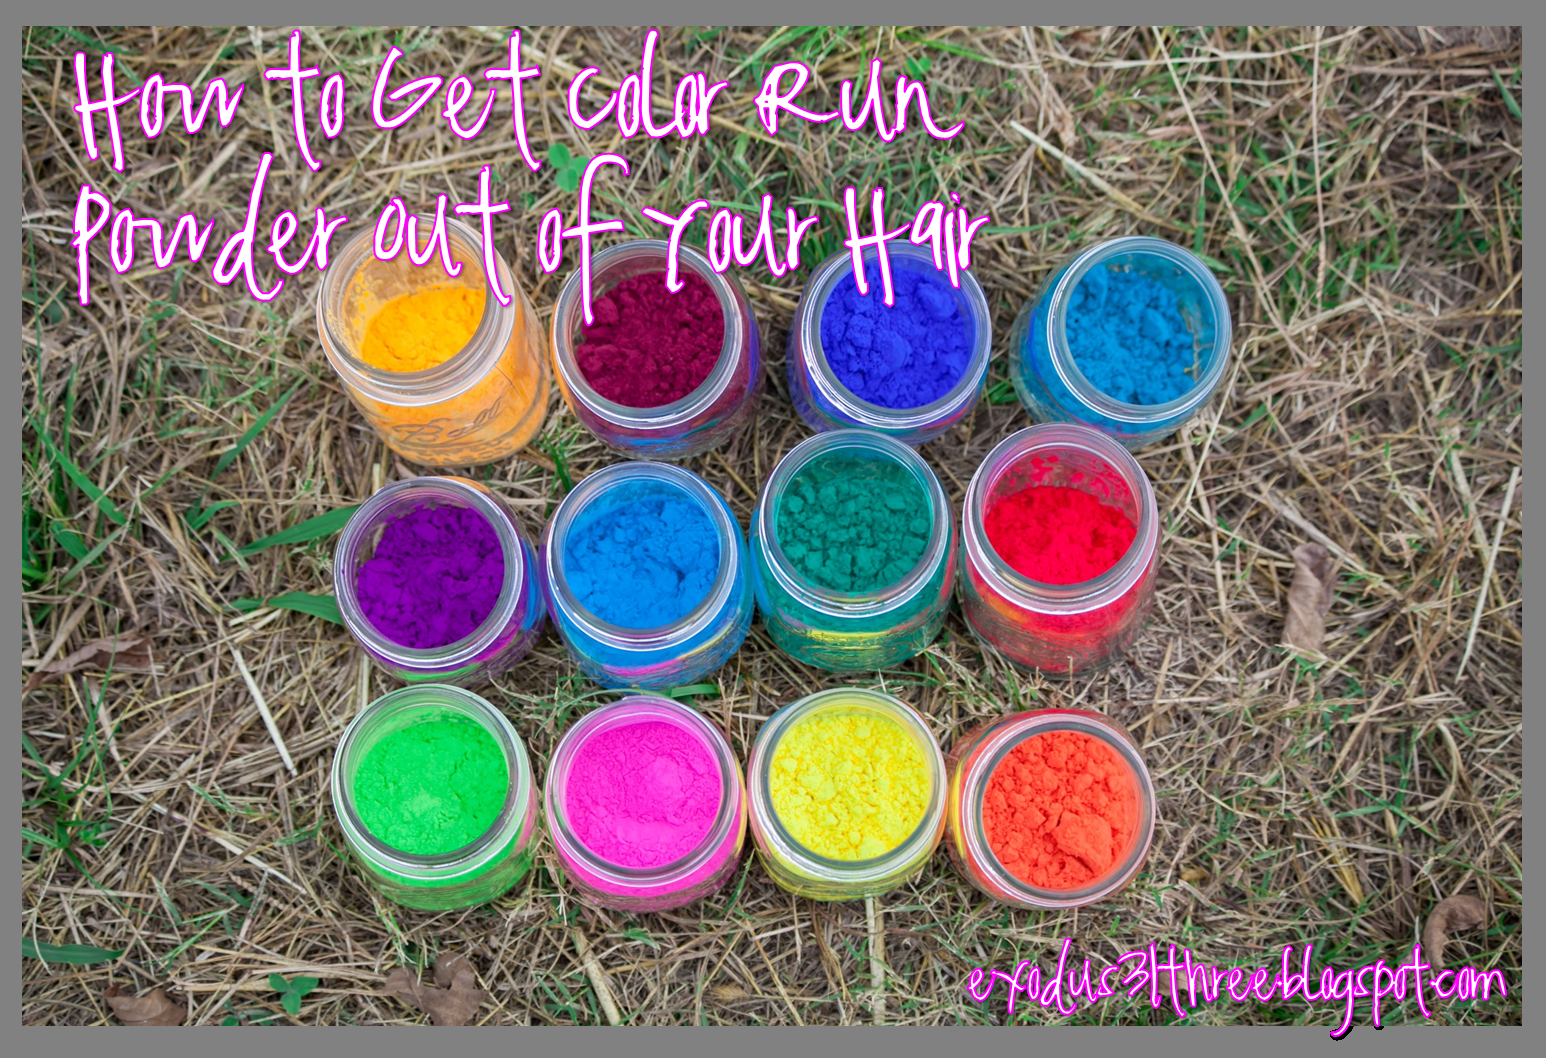 How to Get Color Run Powder Out of Your Hair | Holi Powder | exodus31three